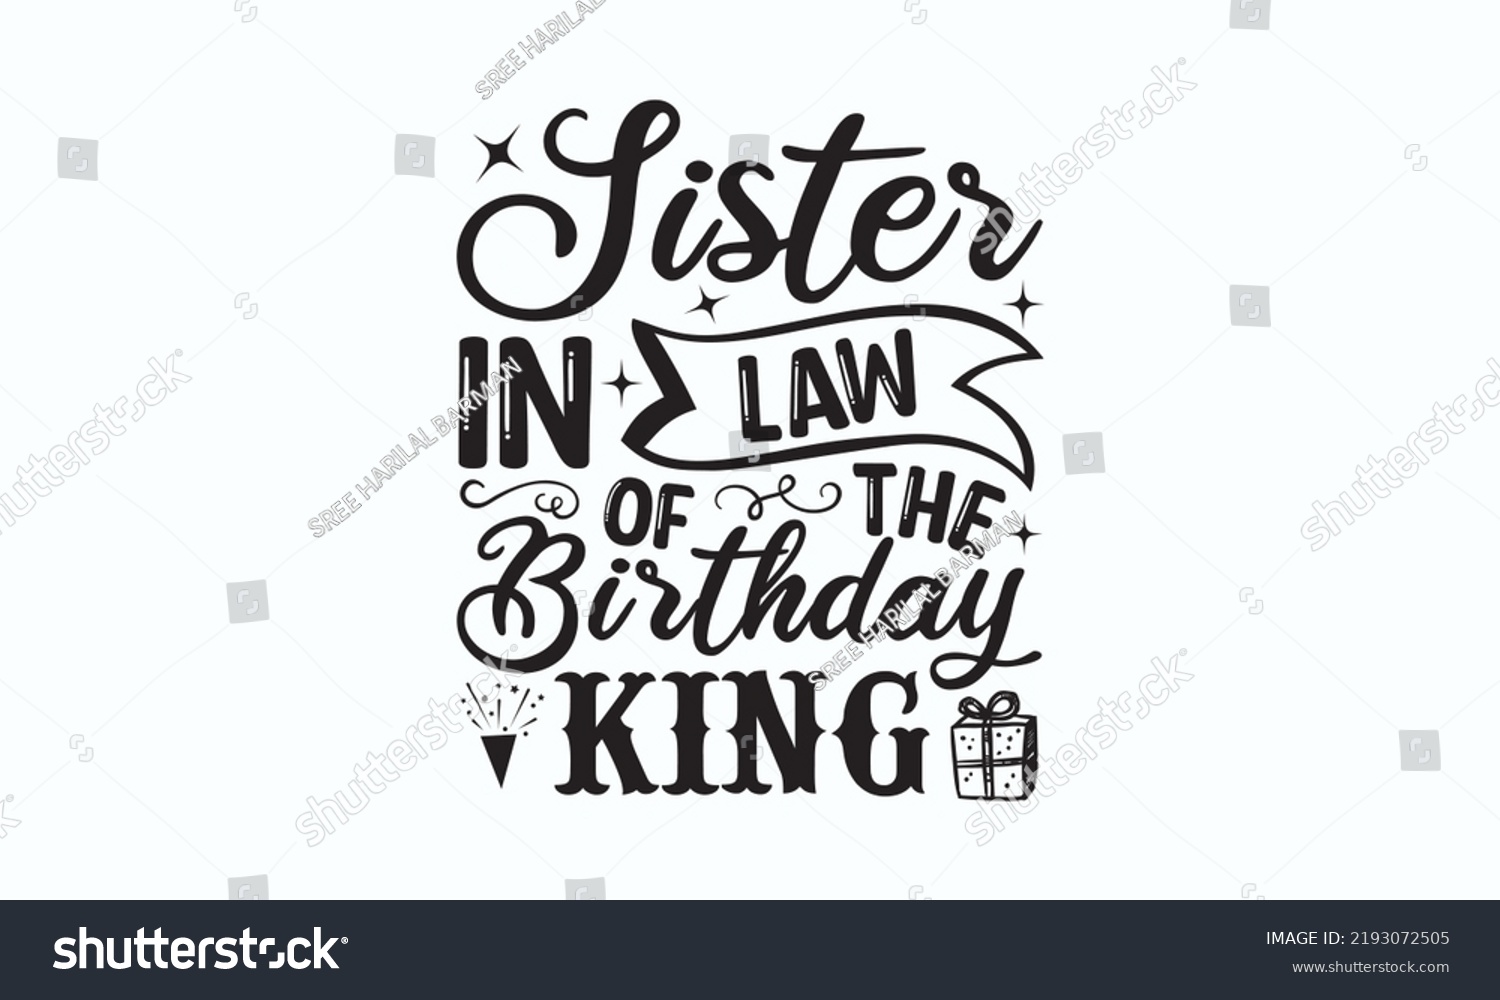 SVG of Sister-in-law of the birthday king - Birthday SVG Digest typographic vector design for greeting cards, Birthday cards, Good for scrapbooking, posters, templet, textiles, gifts, and wedding sets,  svg